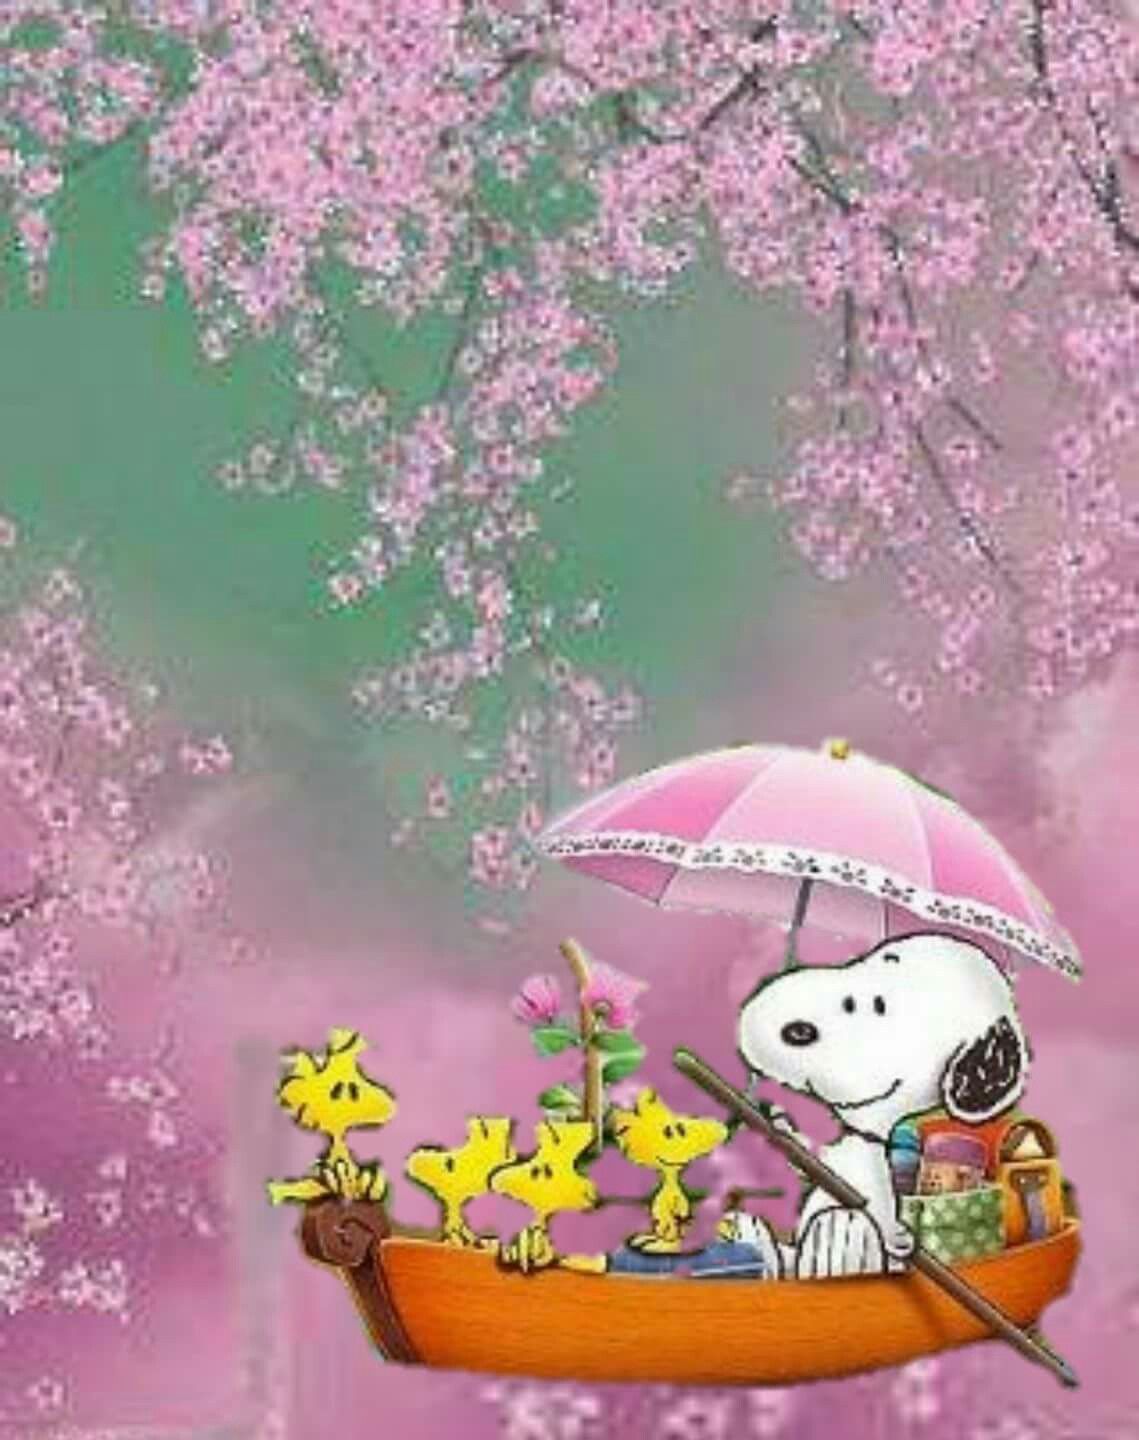 Spring  Snoopy wallpaper Snoopy Snoopy images